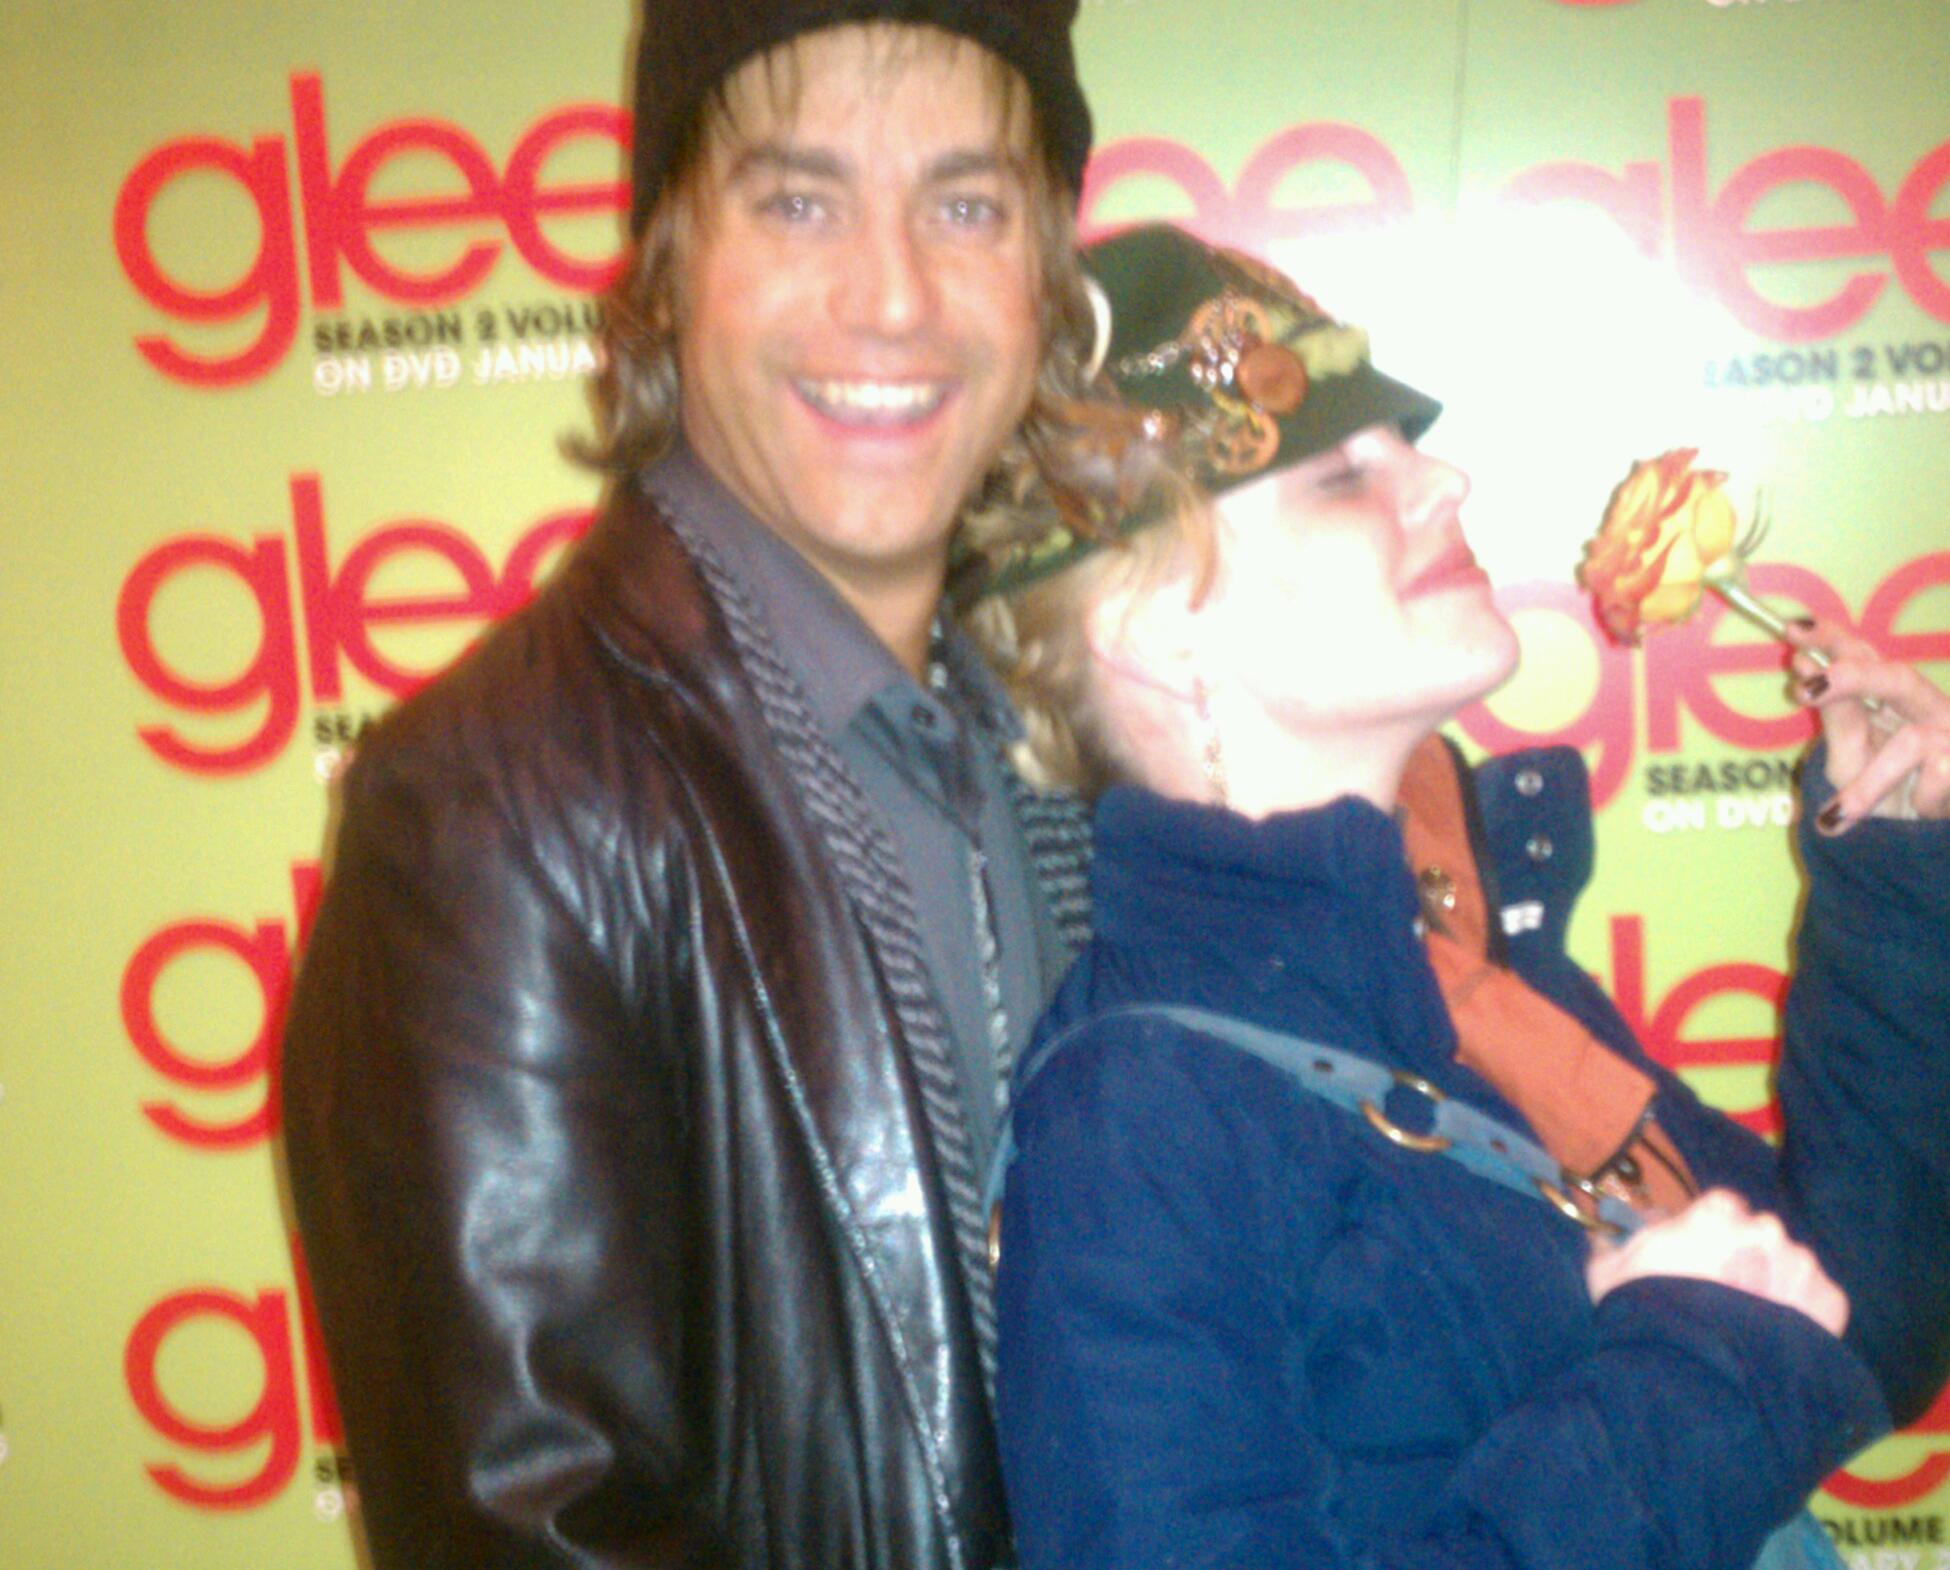 actors Bryan D. and Rachel M. at Glee party